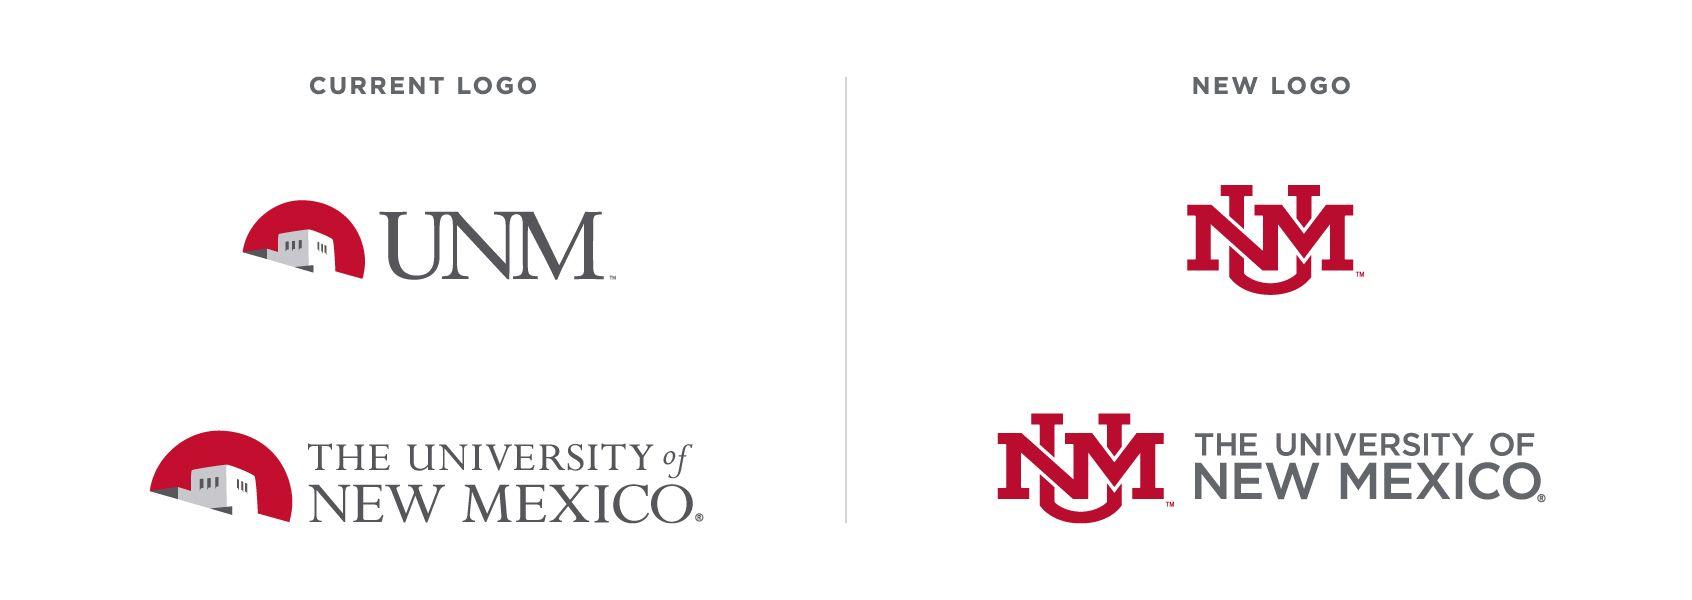 UNM Logo - Questions and Answers :: Marketing & Communication | The University ...